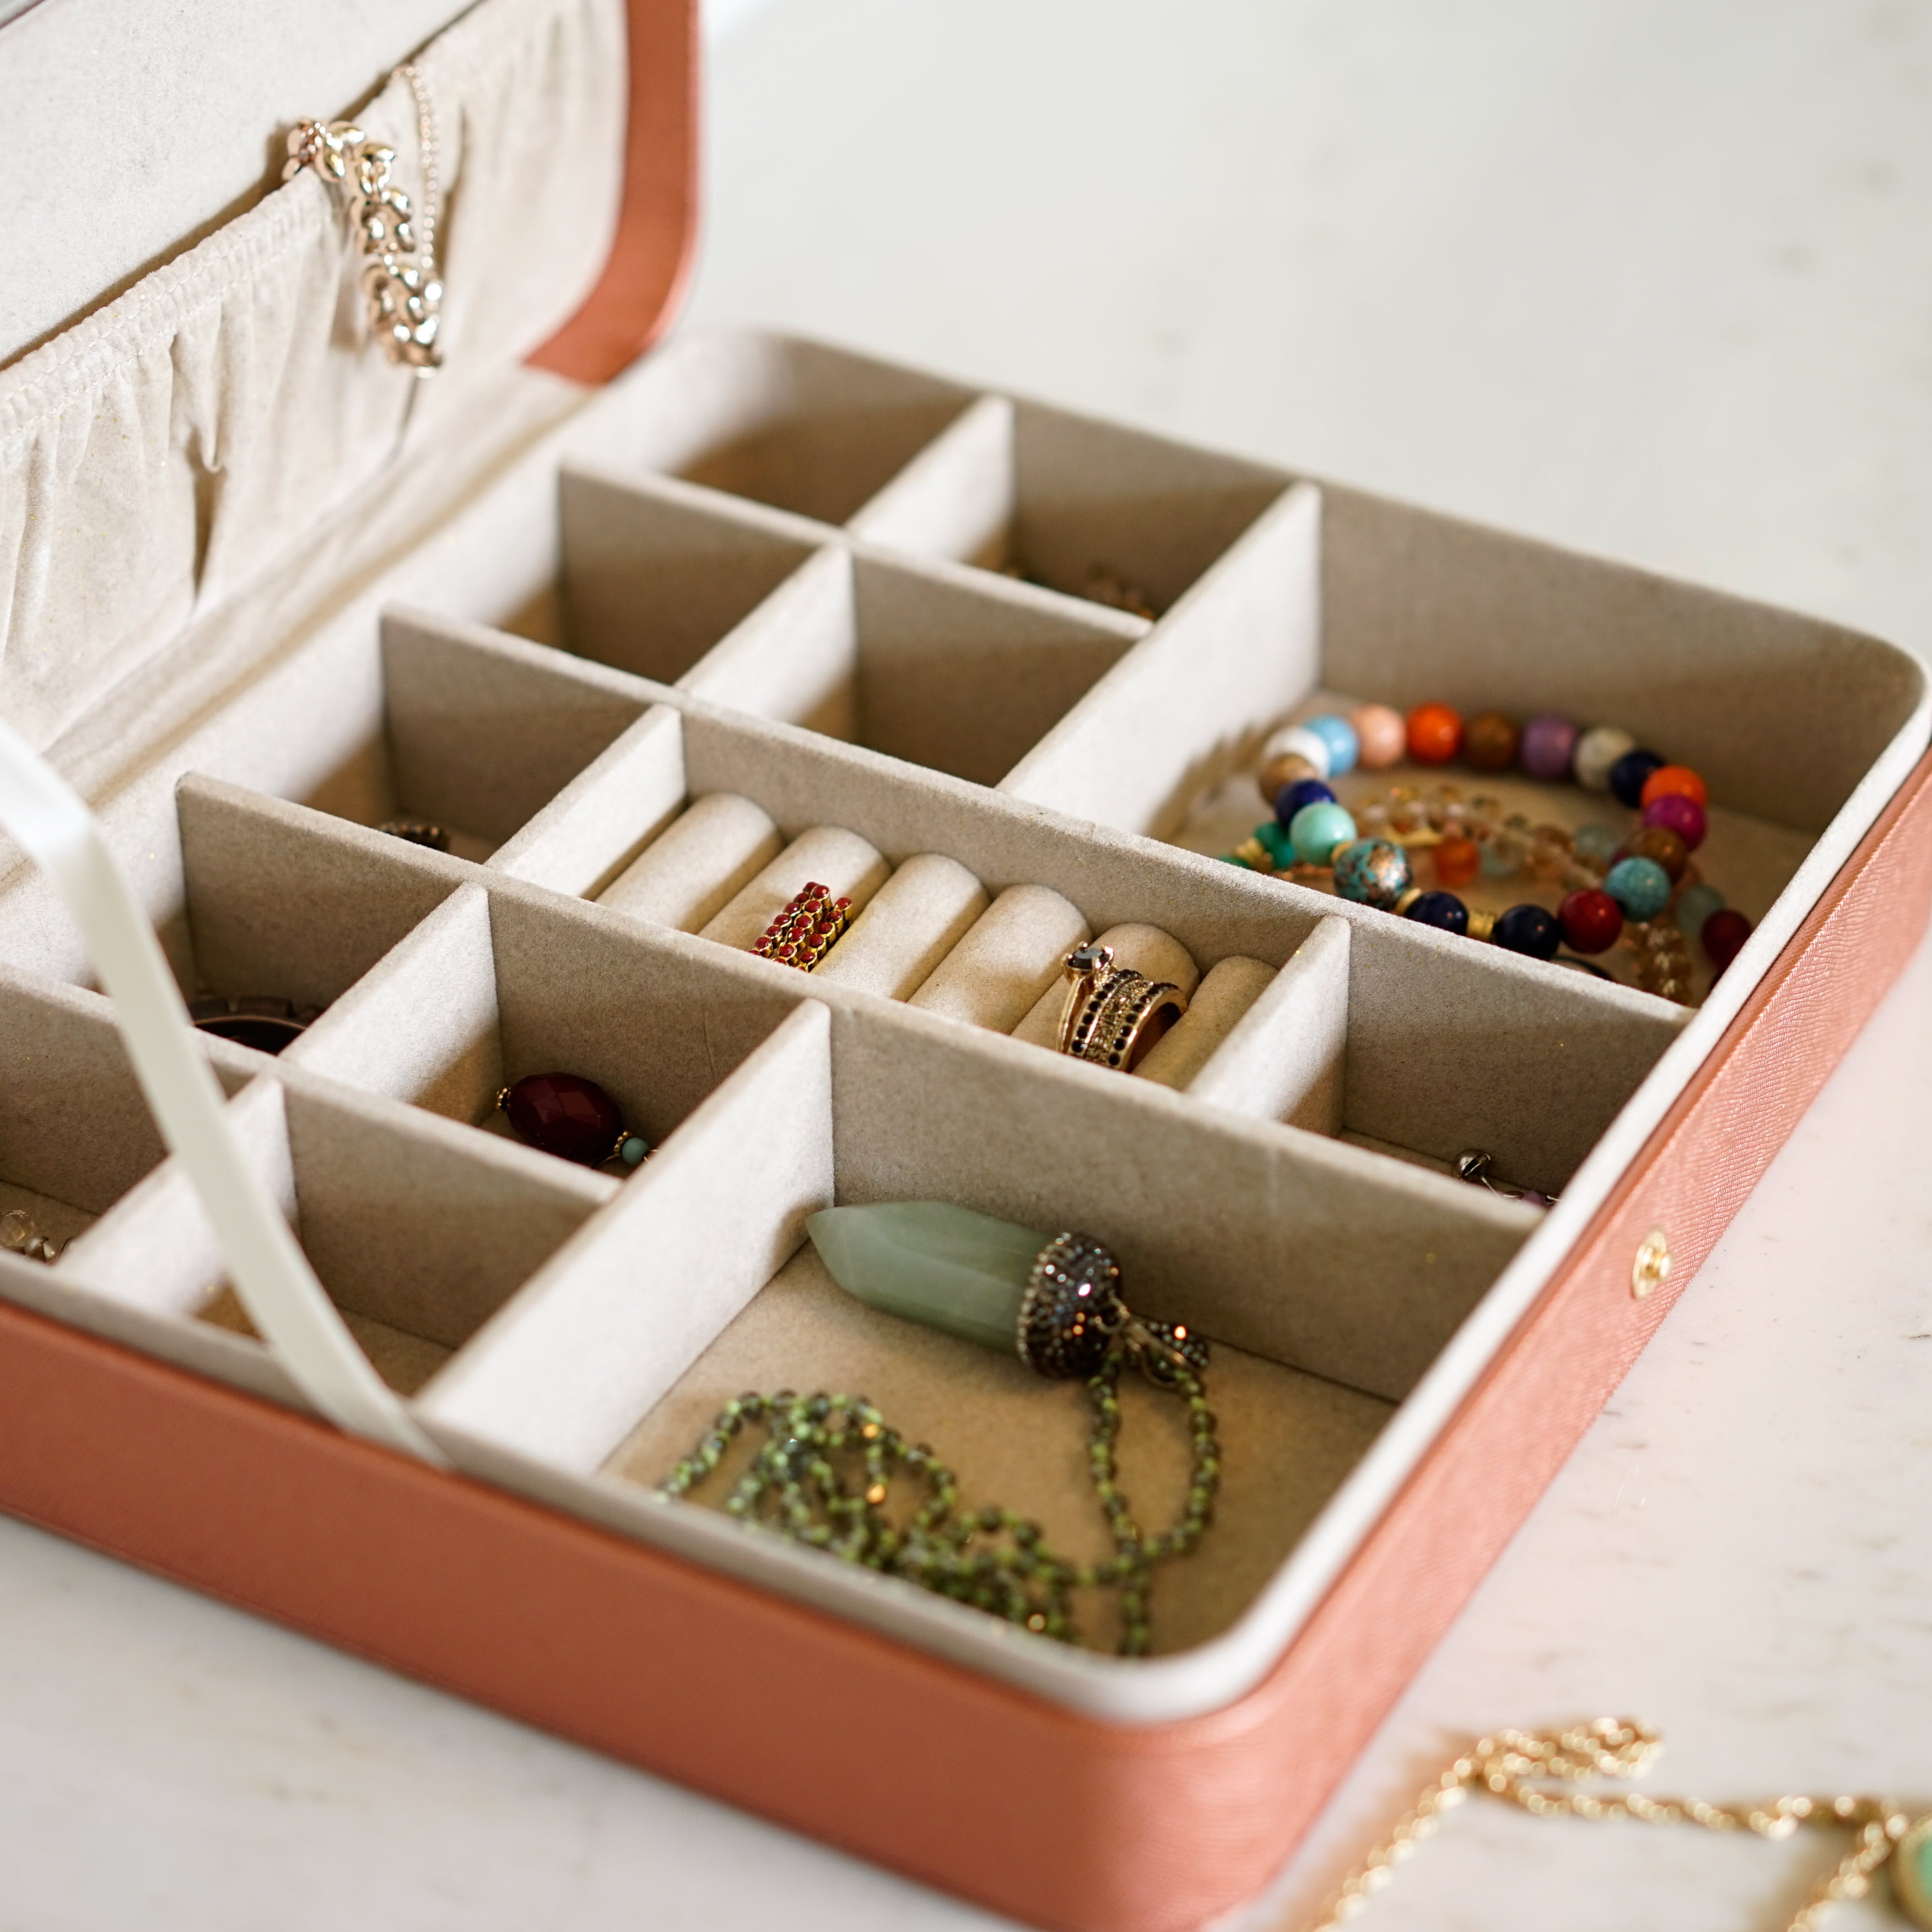 TRAVEL JEWELRY CASE ORGANIZER - health and beauty - by owner